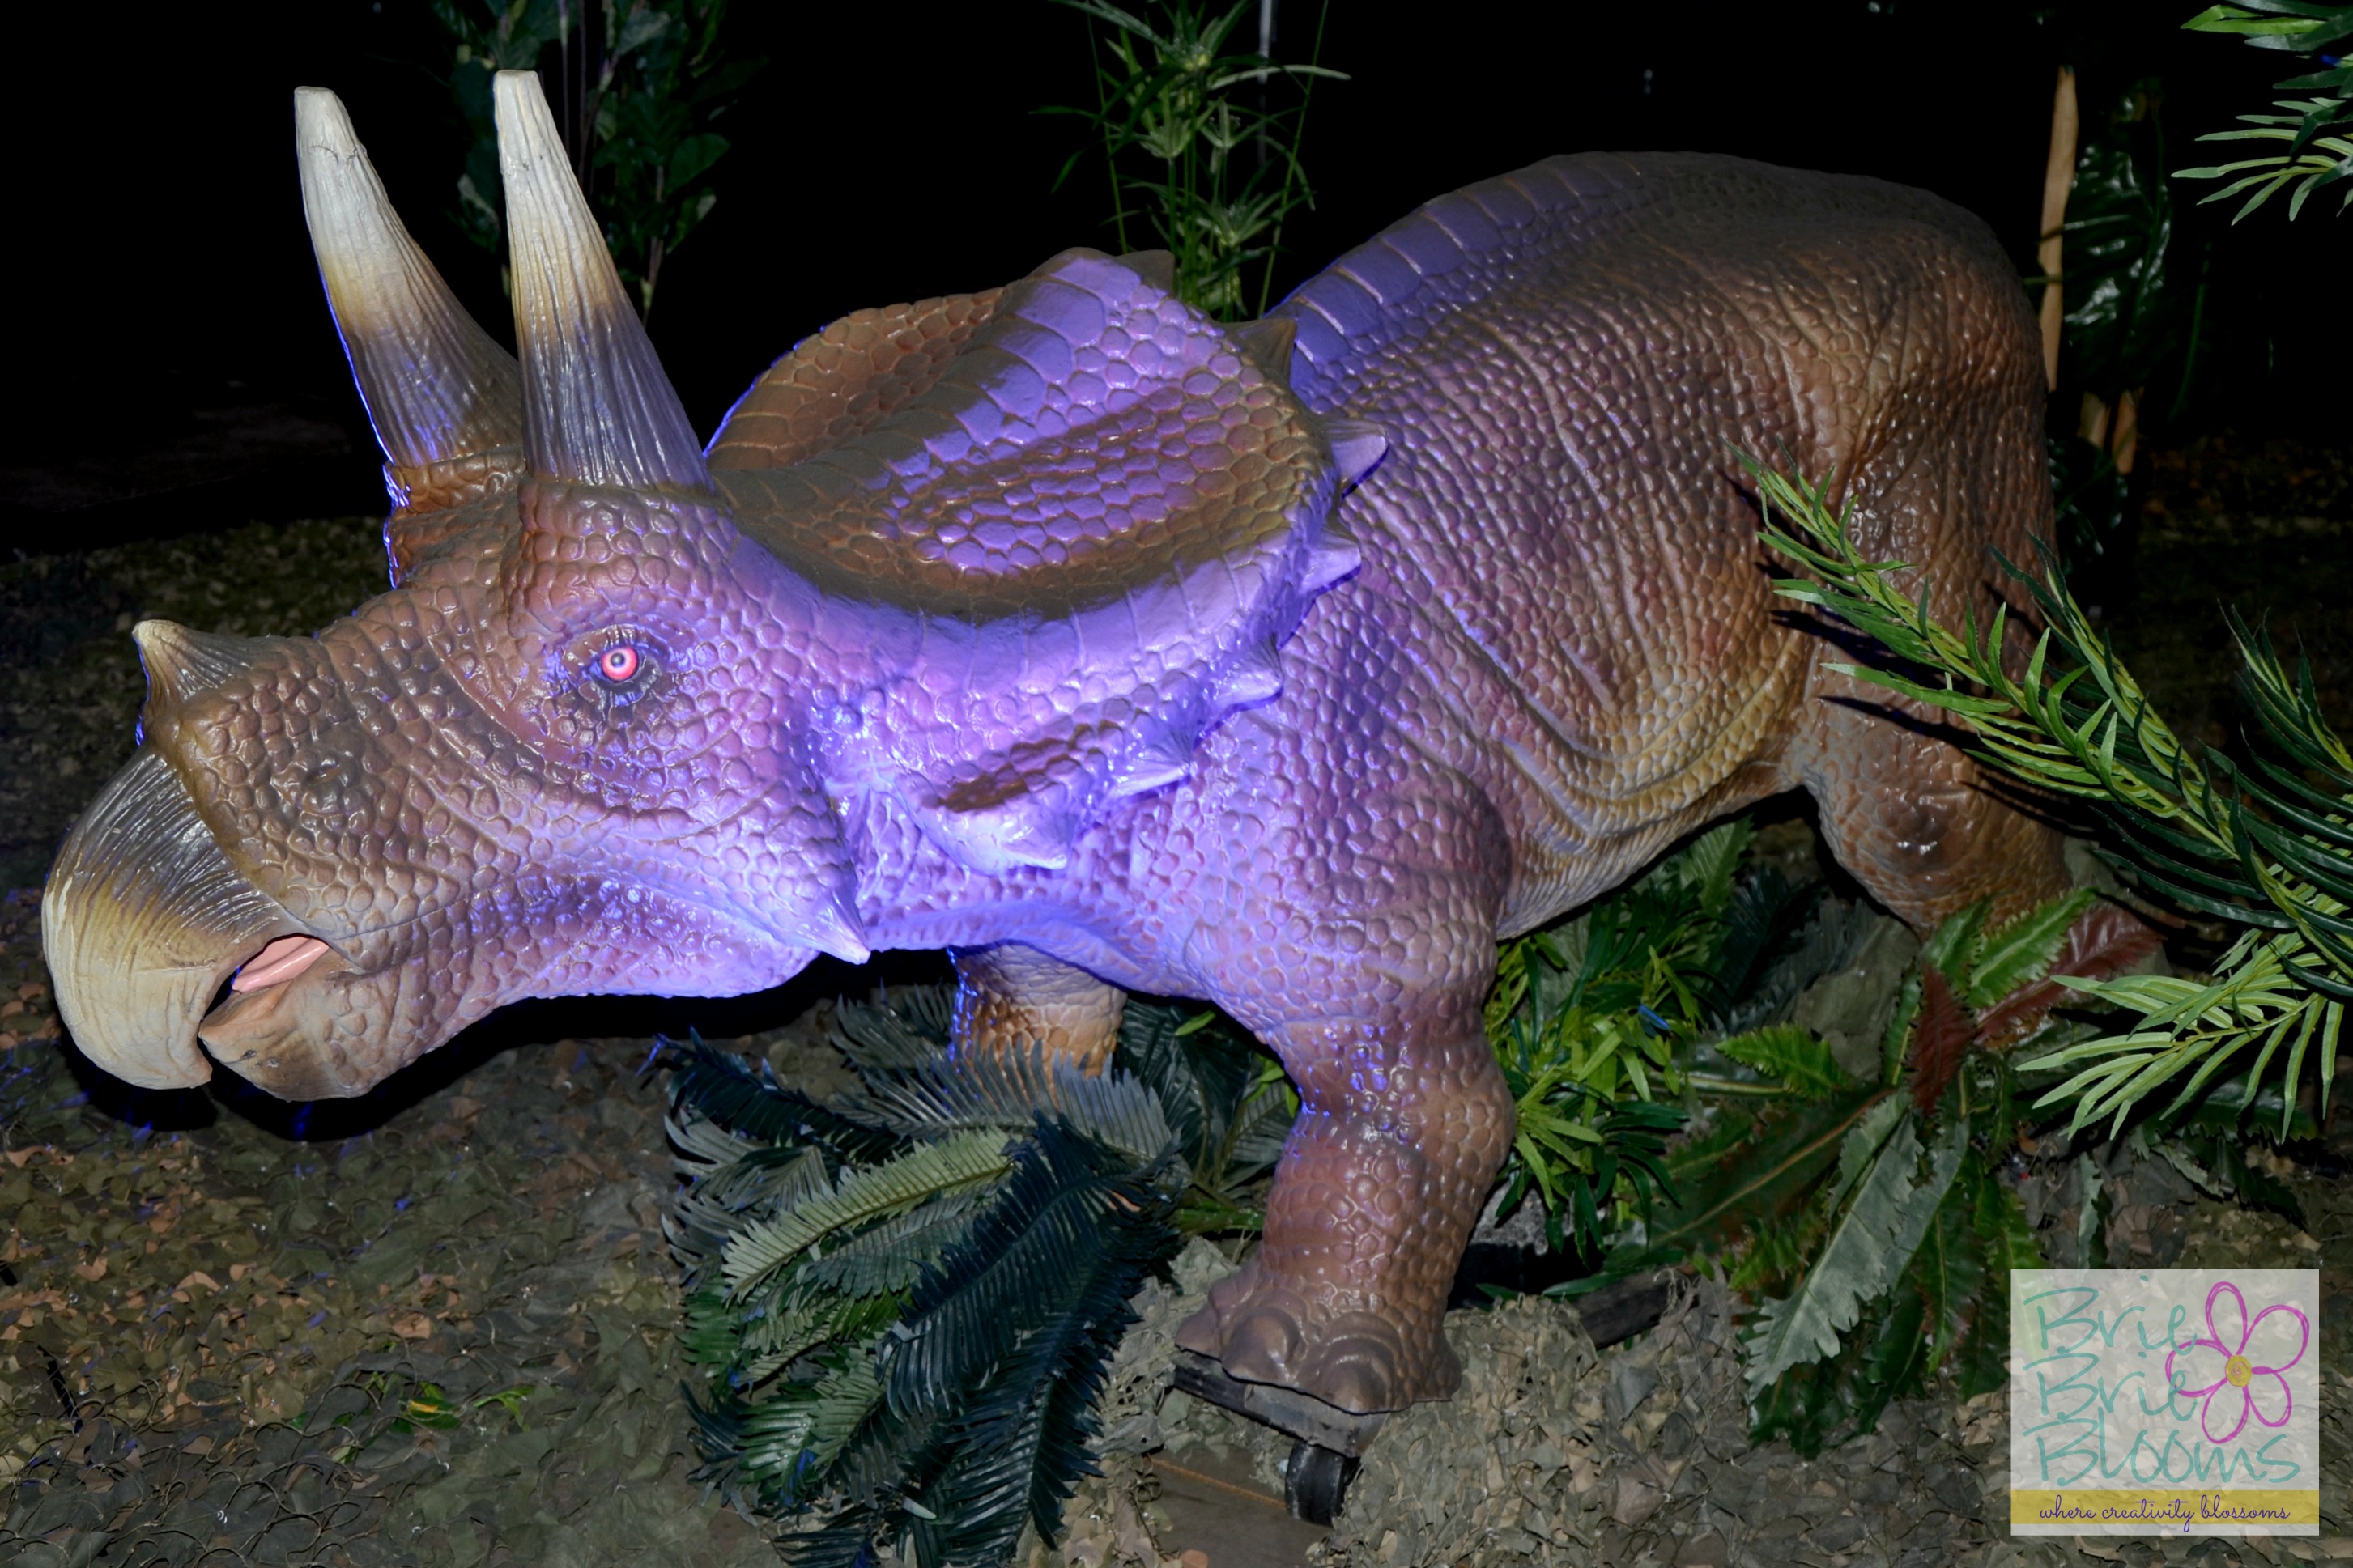 Triceratops at Discover the Dinosaurs in Phoenix January 3-5, 2014